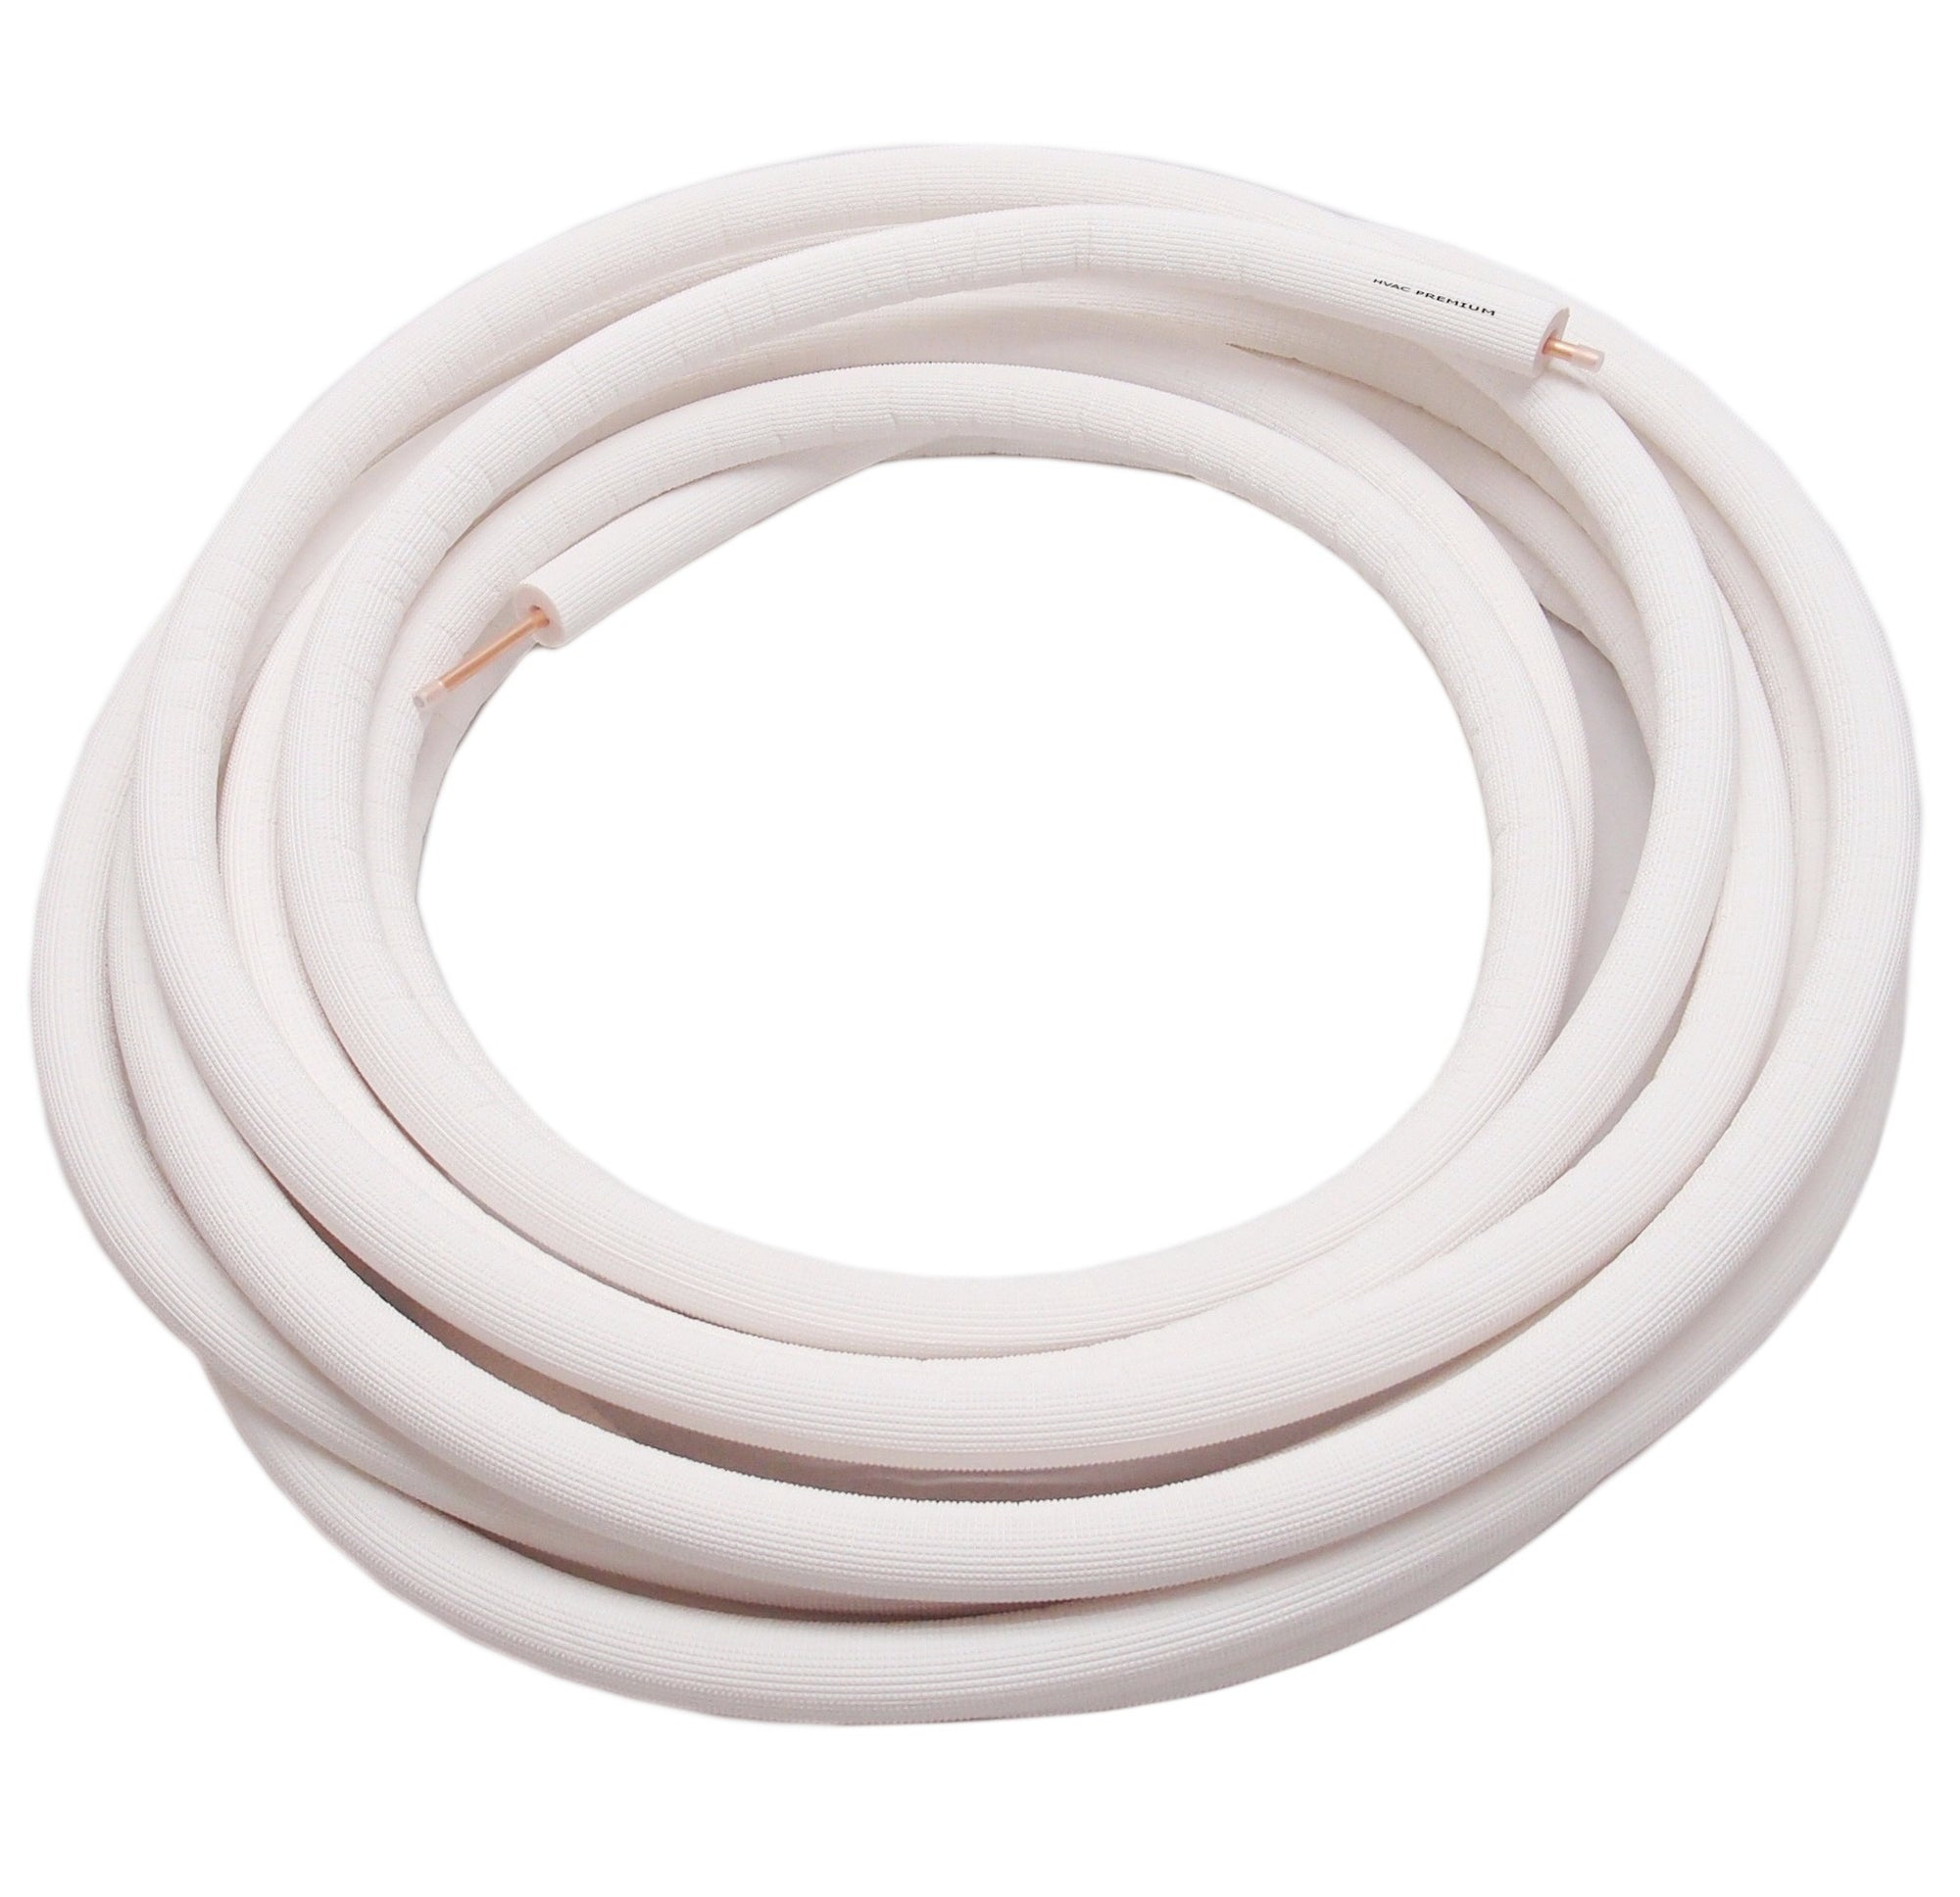 1/2" Insulated Copper Coil Line - Seamless Pipe Tube for HVAC, Refrigerant - 1/2" White Insulation - 164' Long